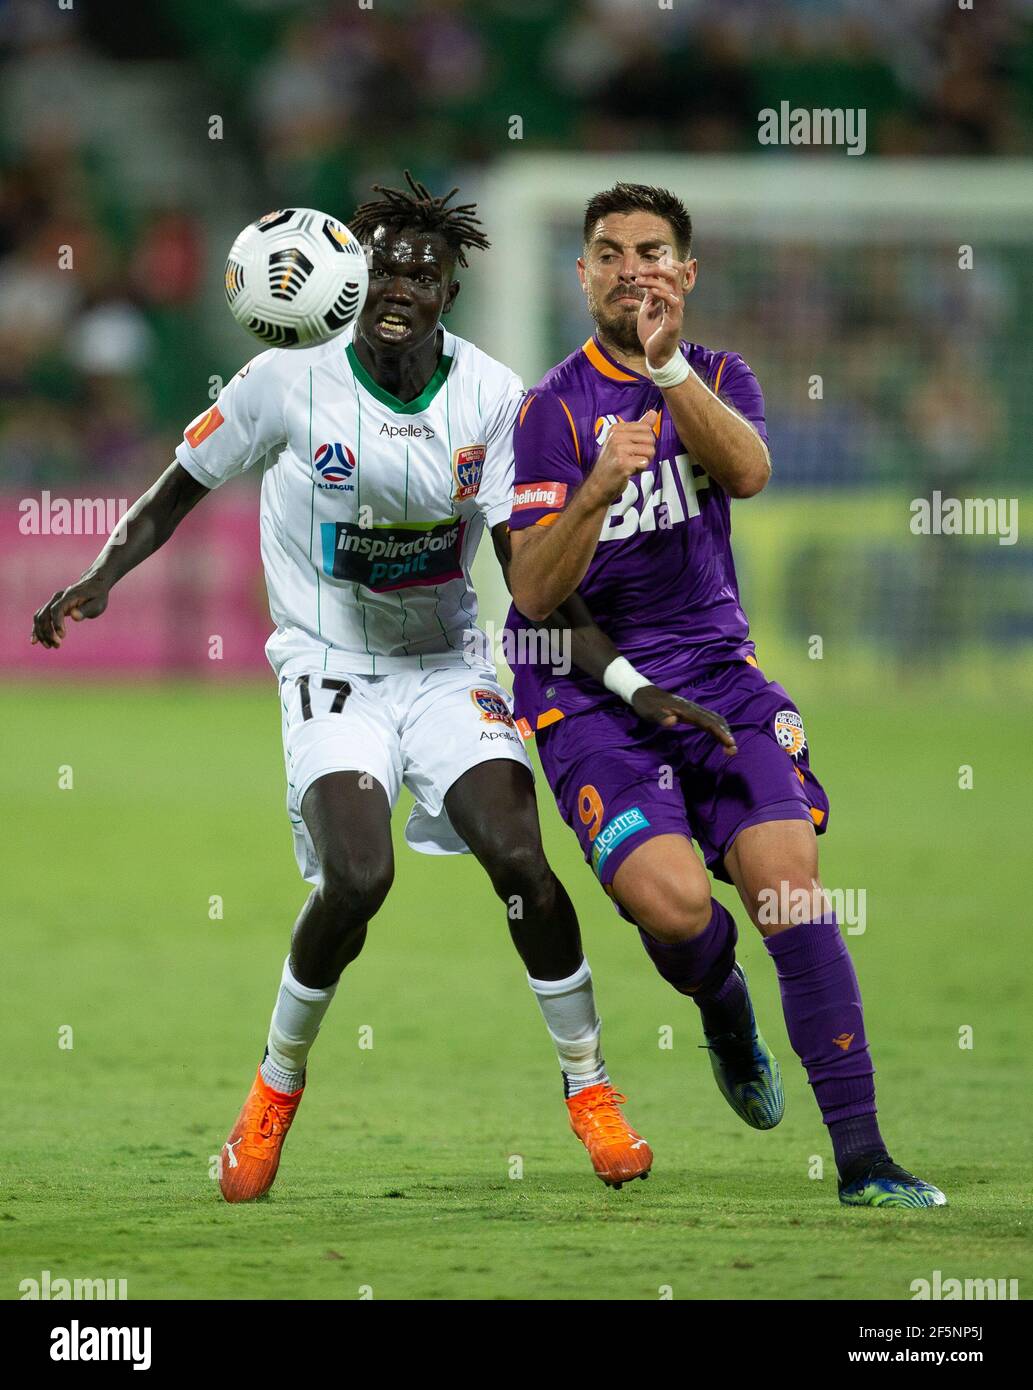 27th March 2021; HBF Park, Perth, Western Australia, Australia; A League Football, Perth Glory versus Newcastle Jets; Bruno Fornaroli Mezza of the Perth Glory challenges for the loose ball against Kuach Yuel of the Newcastle Jets Stock Photo